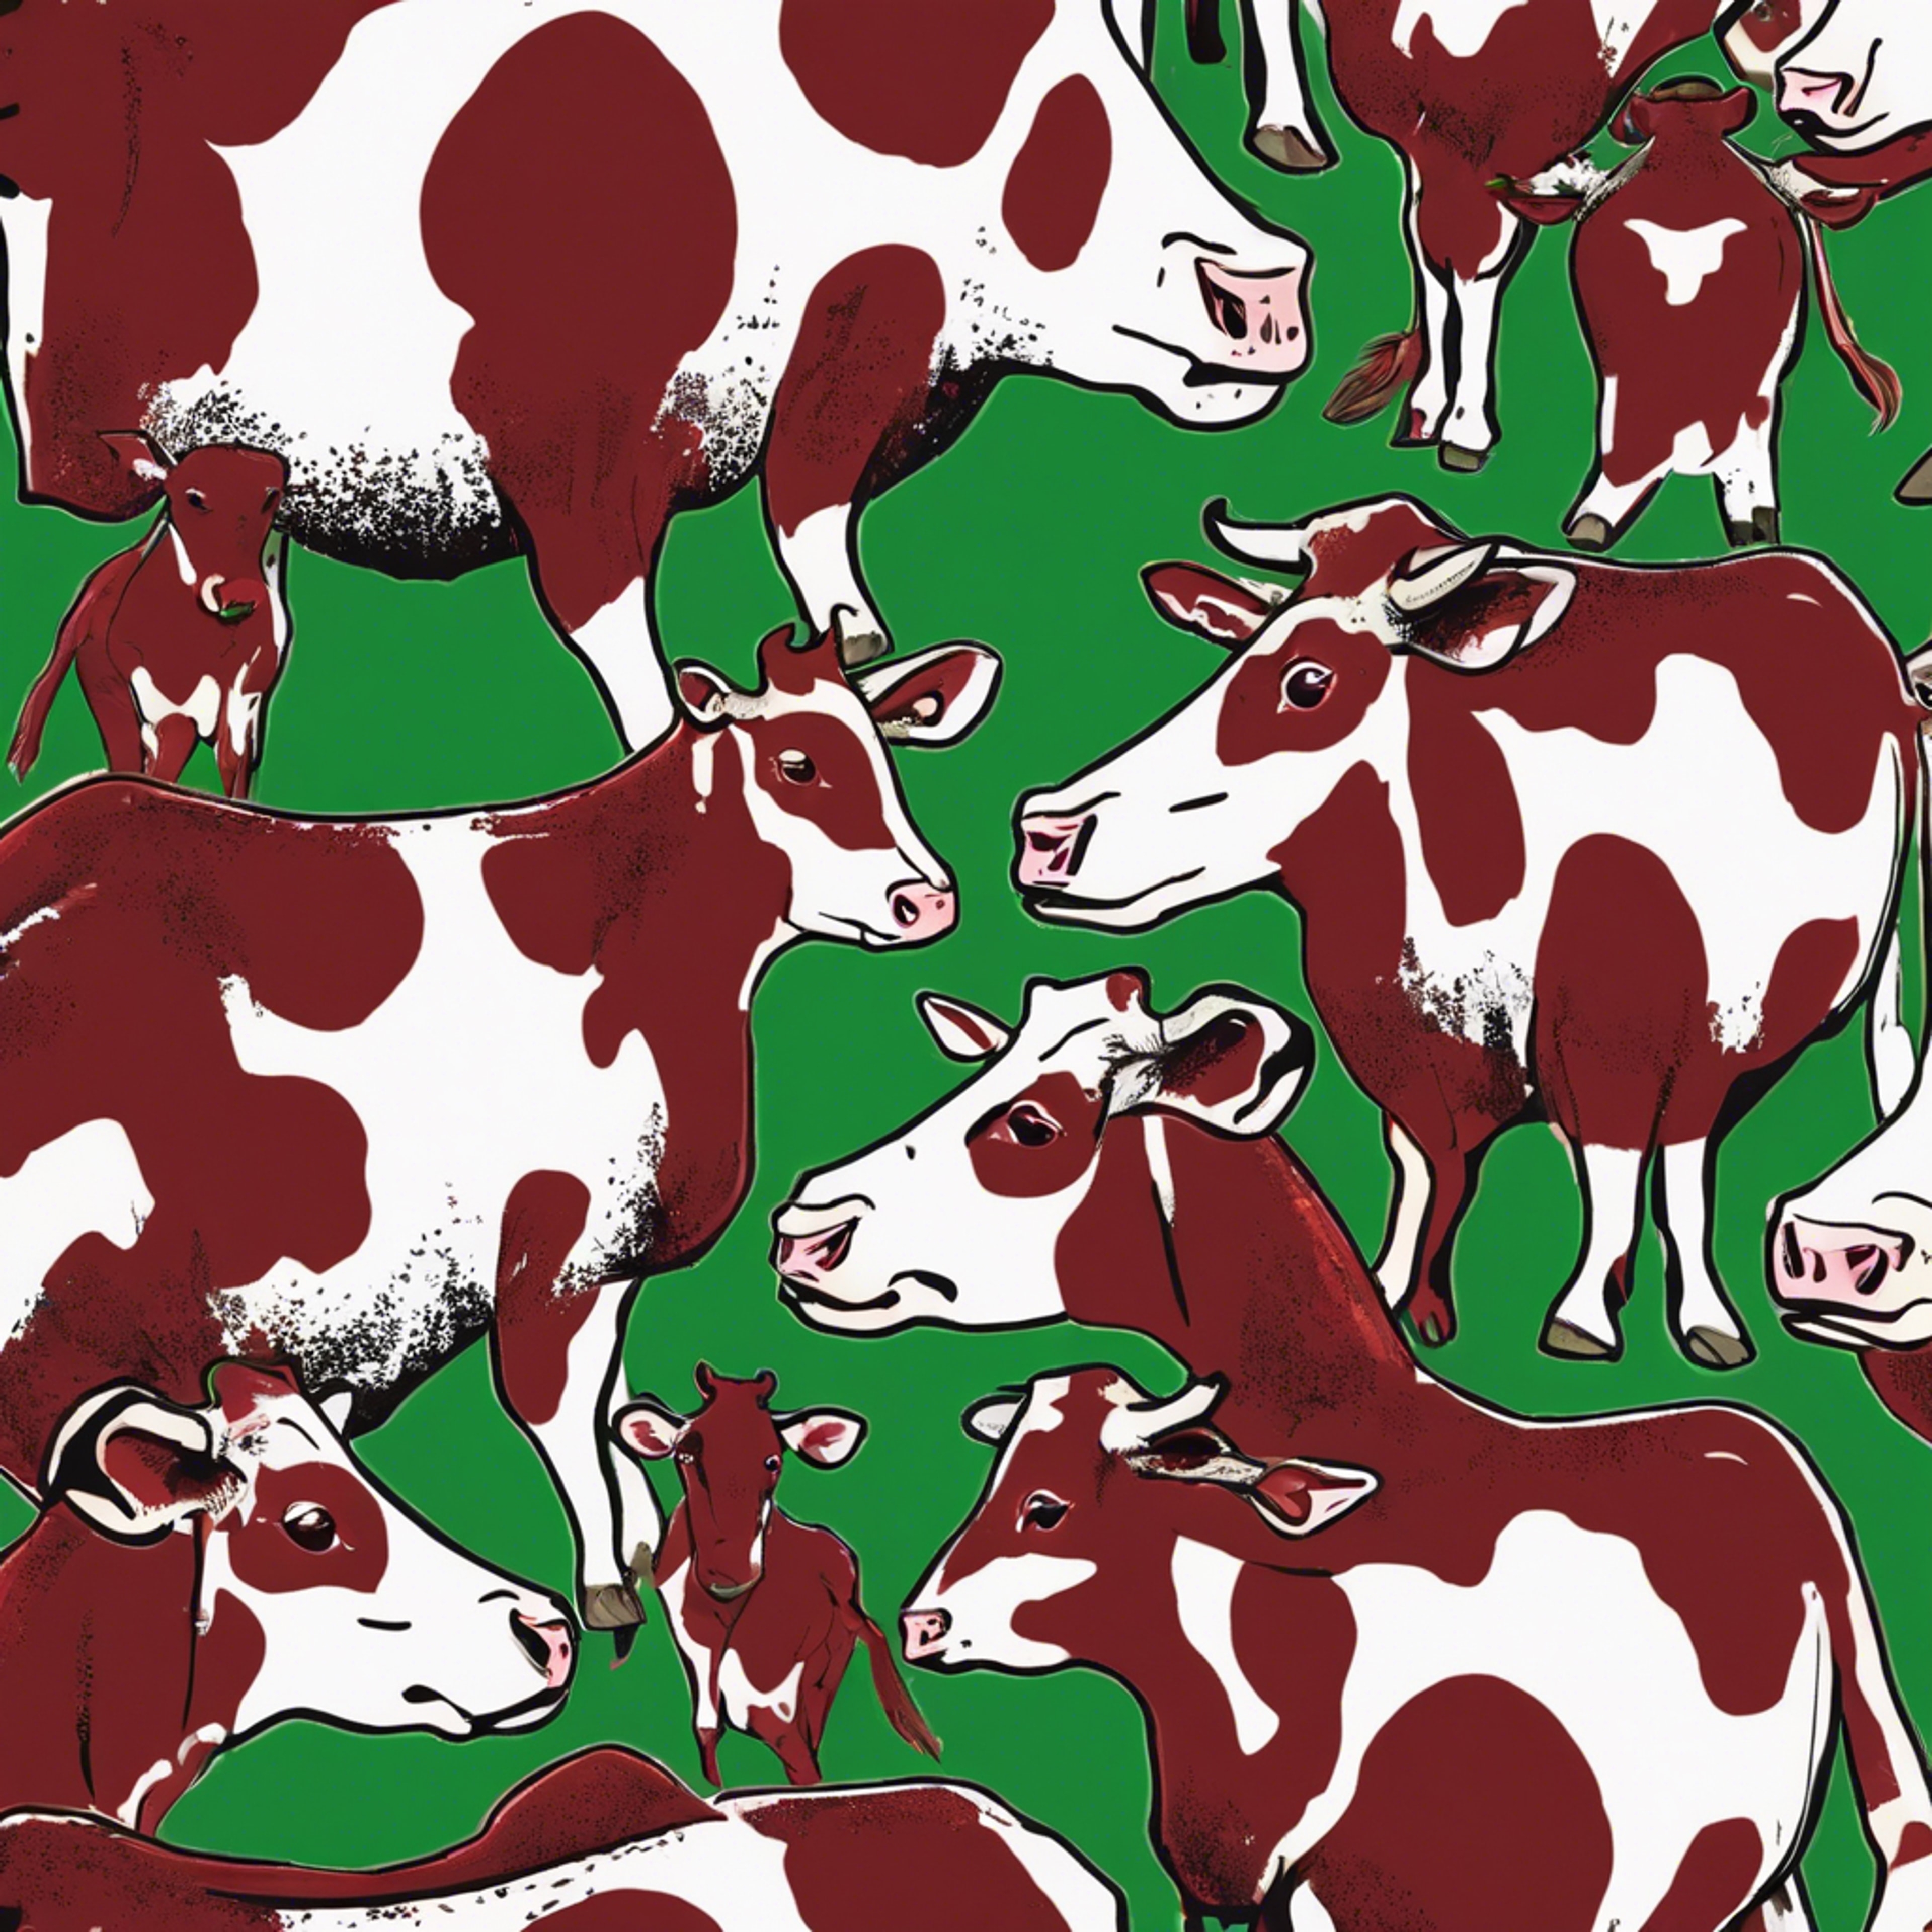 Cow spots in a mixed arrangement of rich red and fresh green. Обои[f1cd1f055c9d420f9ac5]